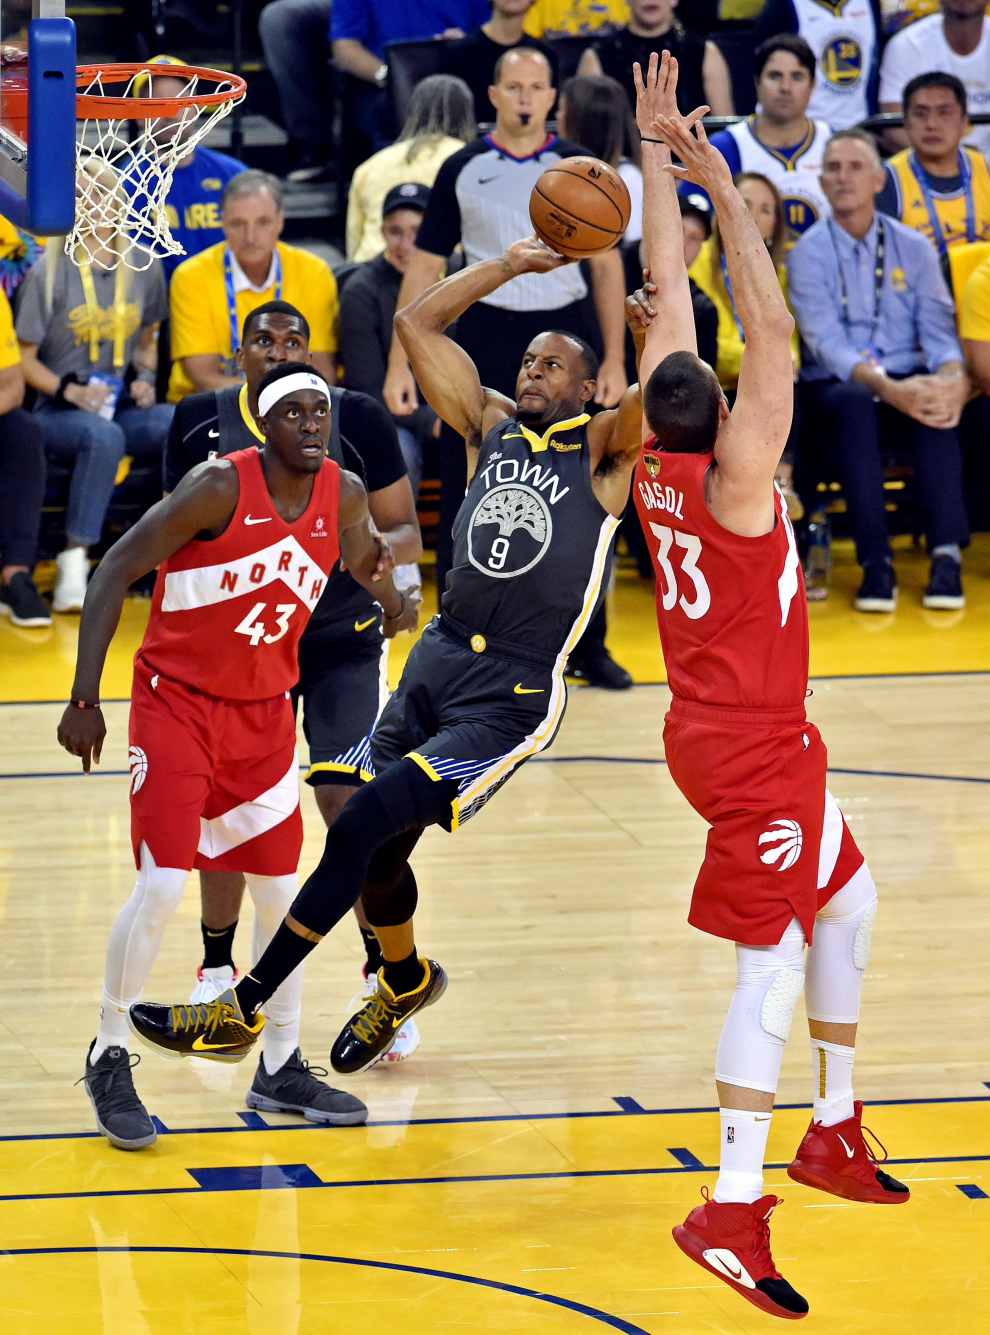 Jun 13, 2019; Oakland, CA, USA; Golden State Warriors guard Andre Iguodala (9) shots a shot while Toronto Raptors center Marc Gasol (33) defends during the first half in game six of the 2019 NBA Finals at Oracle Arena. Mandatory Credit:Cary Edmondson-USA TODAY Sports [[[REUTERS VOCENTO]]] BASKETBALL-NBA-GSW-TOR/